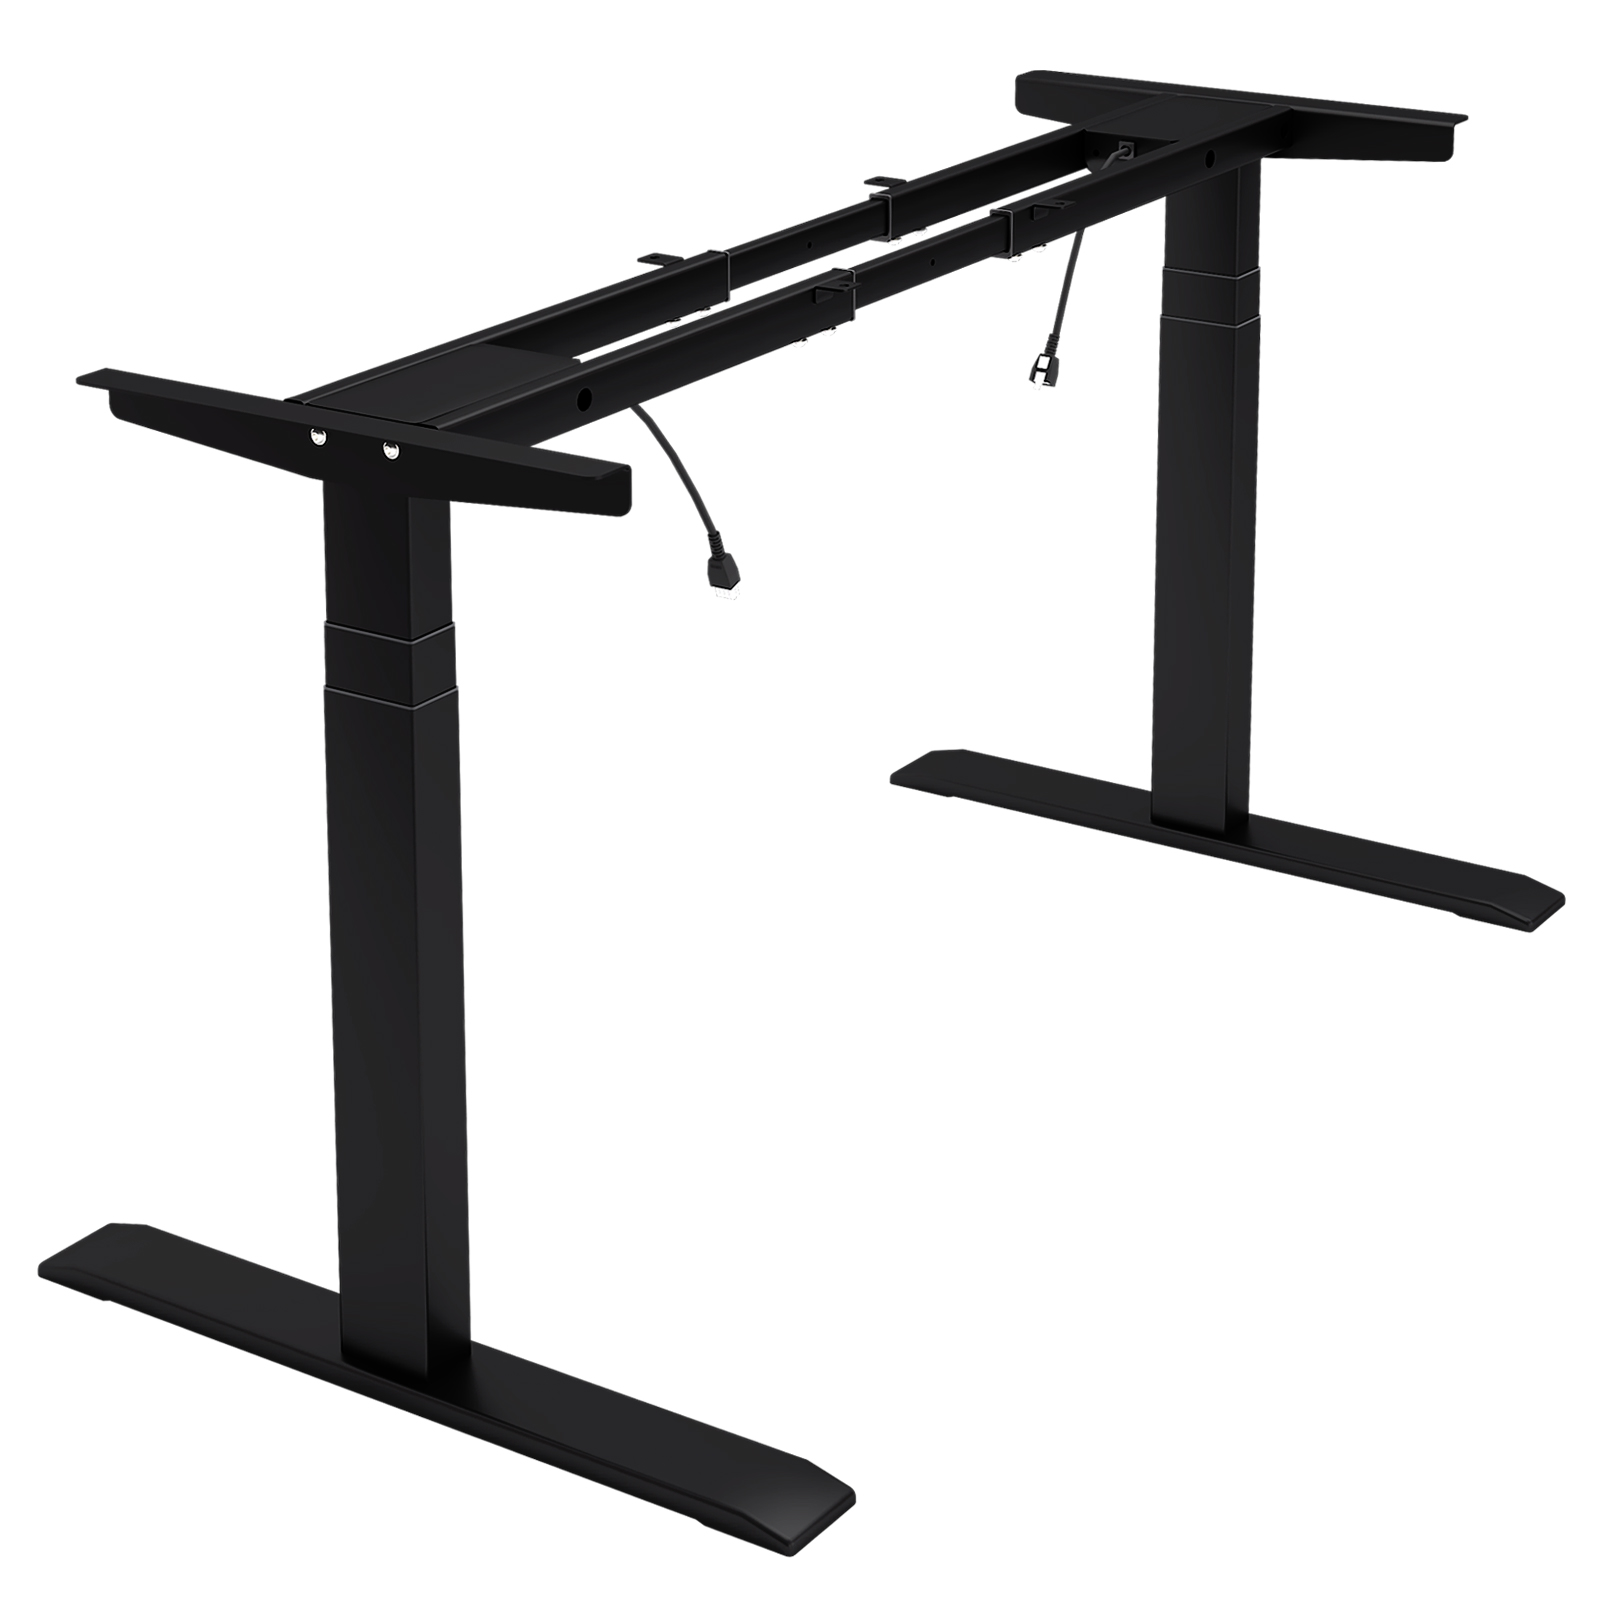 TOPSKY Dual Motor 3 Stage Electric Adjustable Standing Desk Frame Heavy Duty 300lb Load Capacity for Home Office (Frame Only) DF04.01